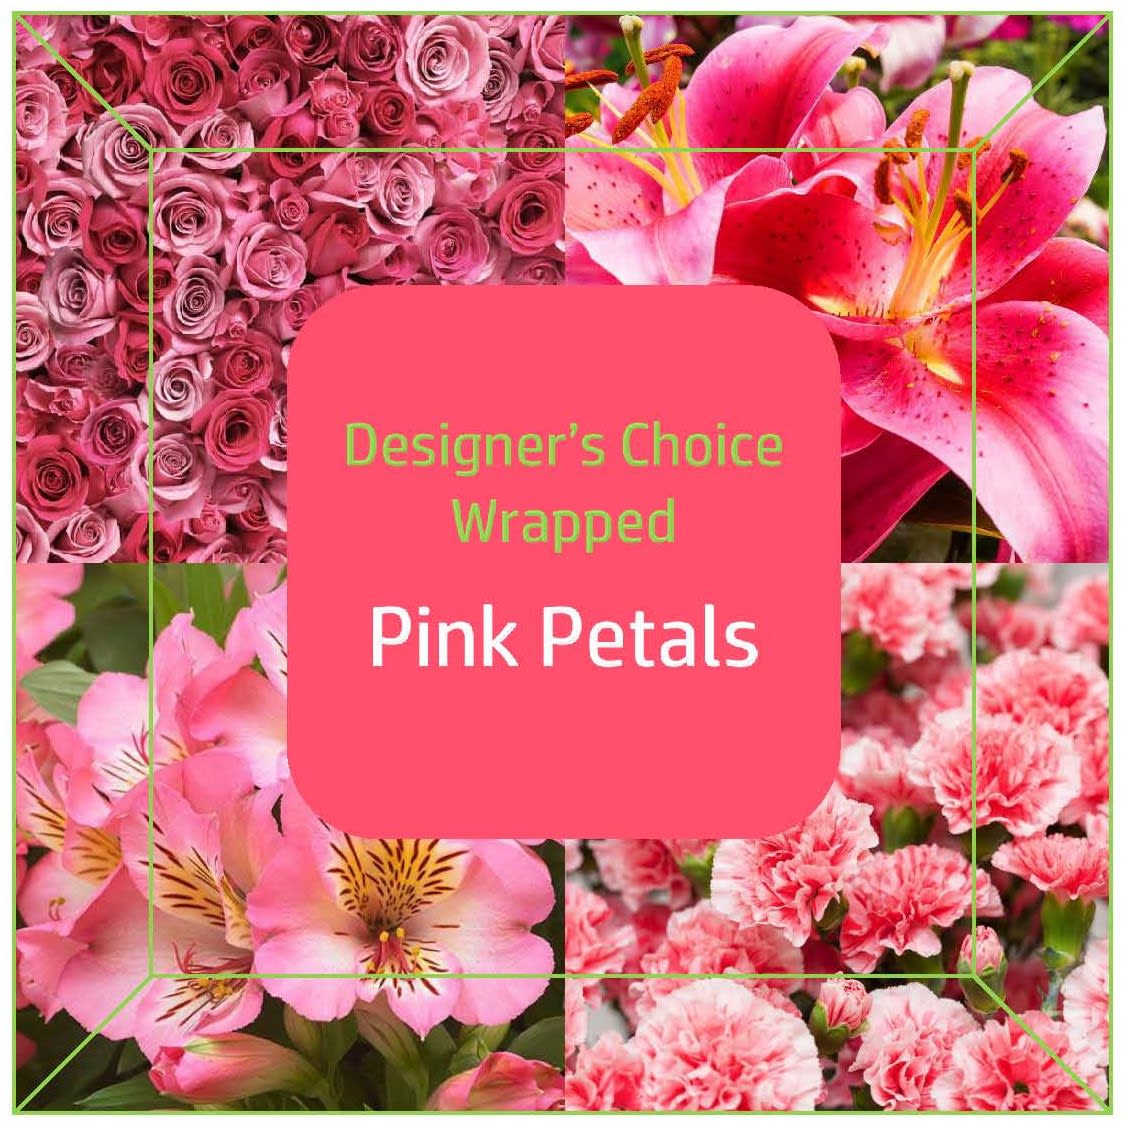 Designer's Choice (Wrapped) Pink Petals - Send this made-on-the-spot wrapped floral bouquet filled with an assortment of pretty pink petals! Our expert designer will hand-select the freshest of our seasonal blooms and design them into a beautiful wrapped bouquet, all tied together with a lovely bow! (NO VASE) Sizes and colors will vary. If you like a certain color more than another or you want us to avoid any type of flower, please leave a note in the special instructions.